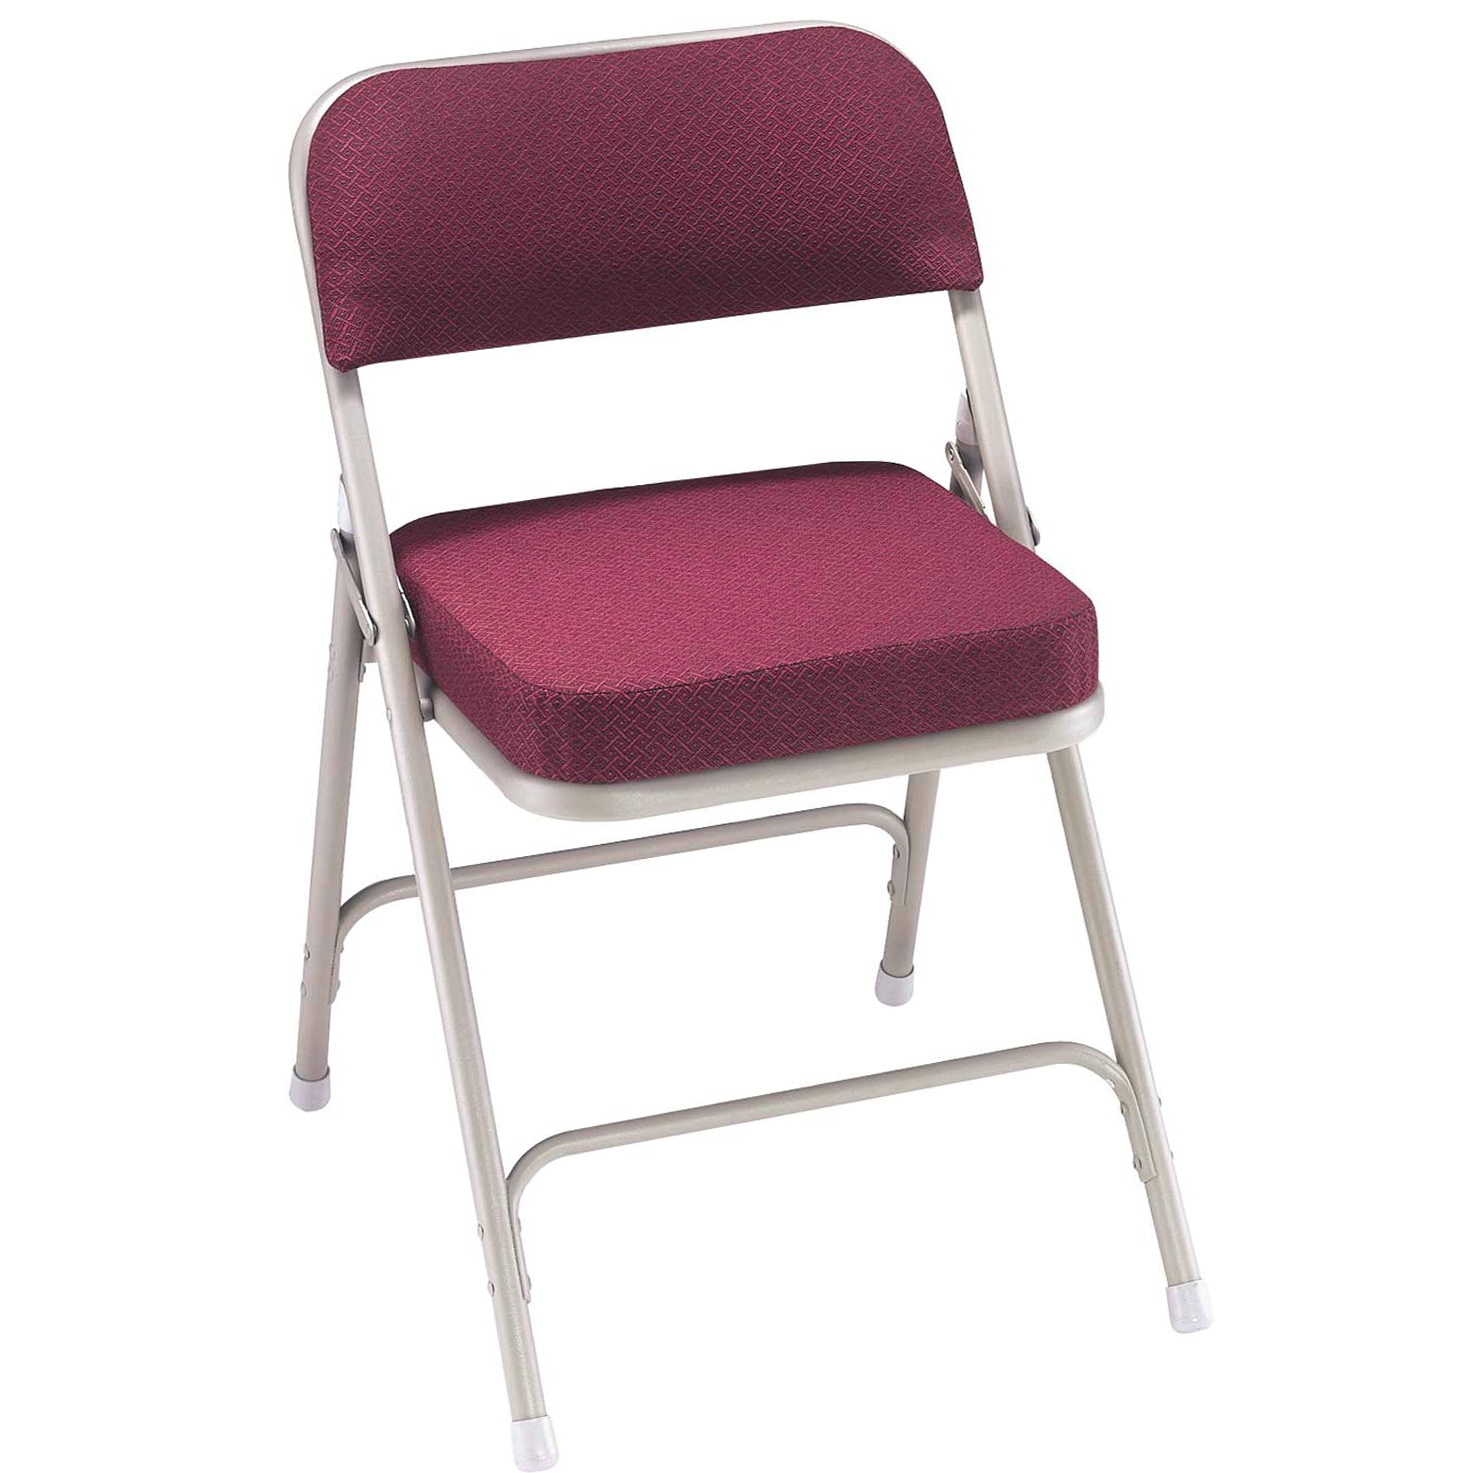 Cushioned Folding Chairs Costco 